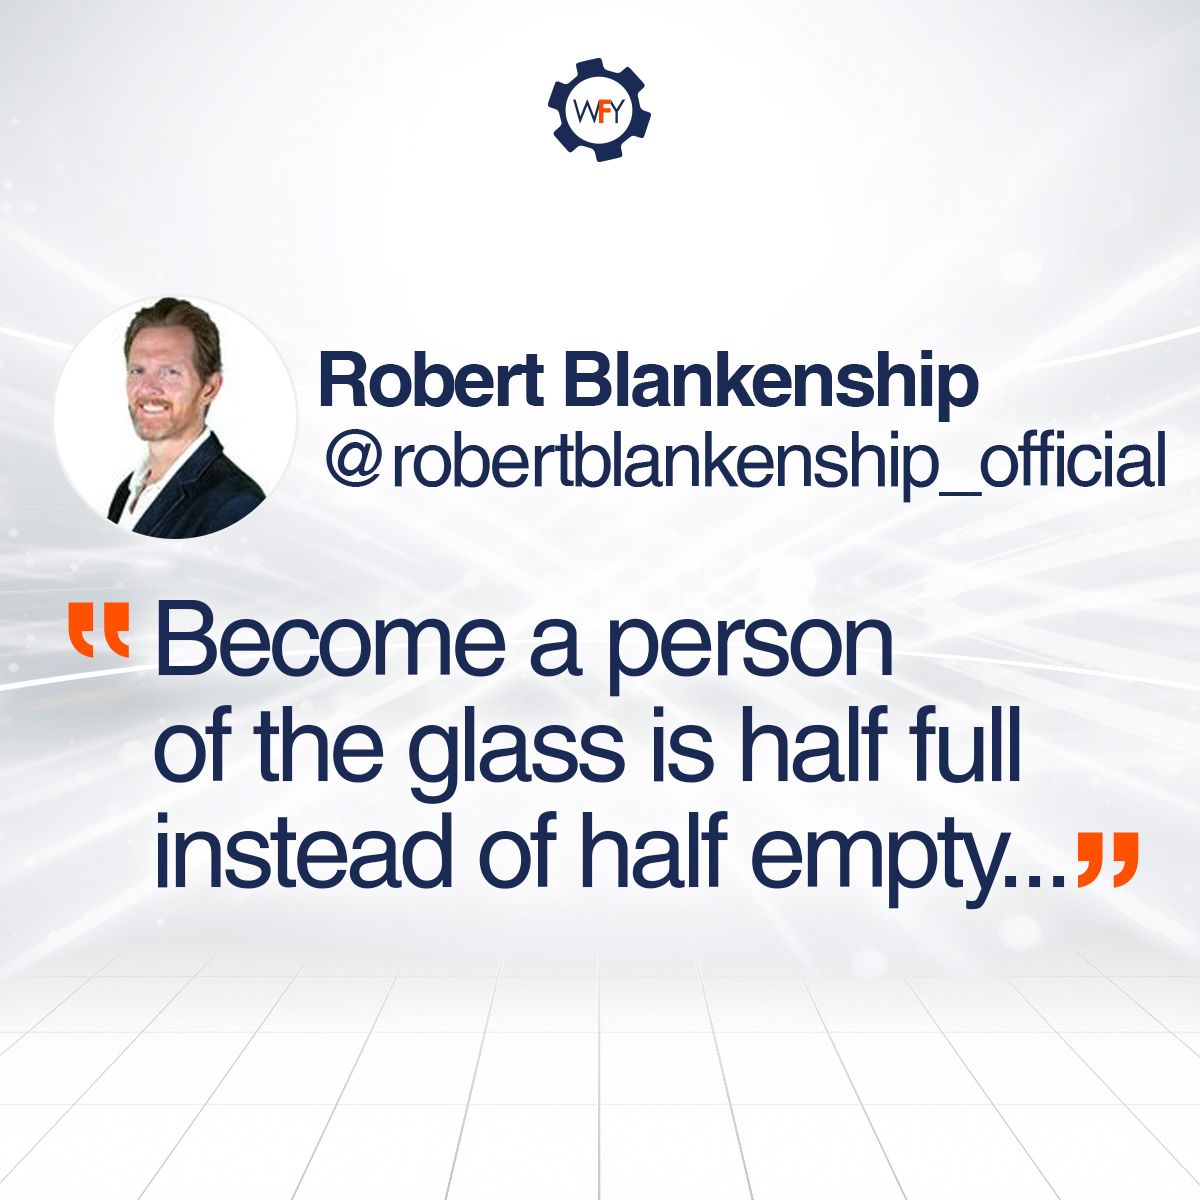 Become a person of a glass is half full instead of half empty